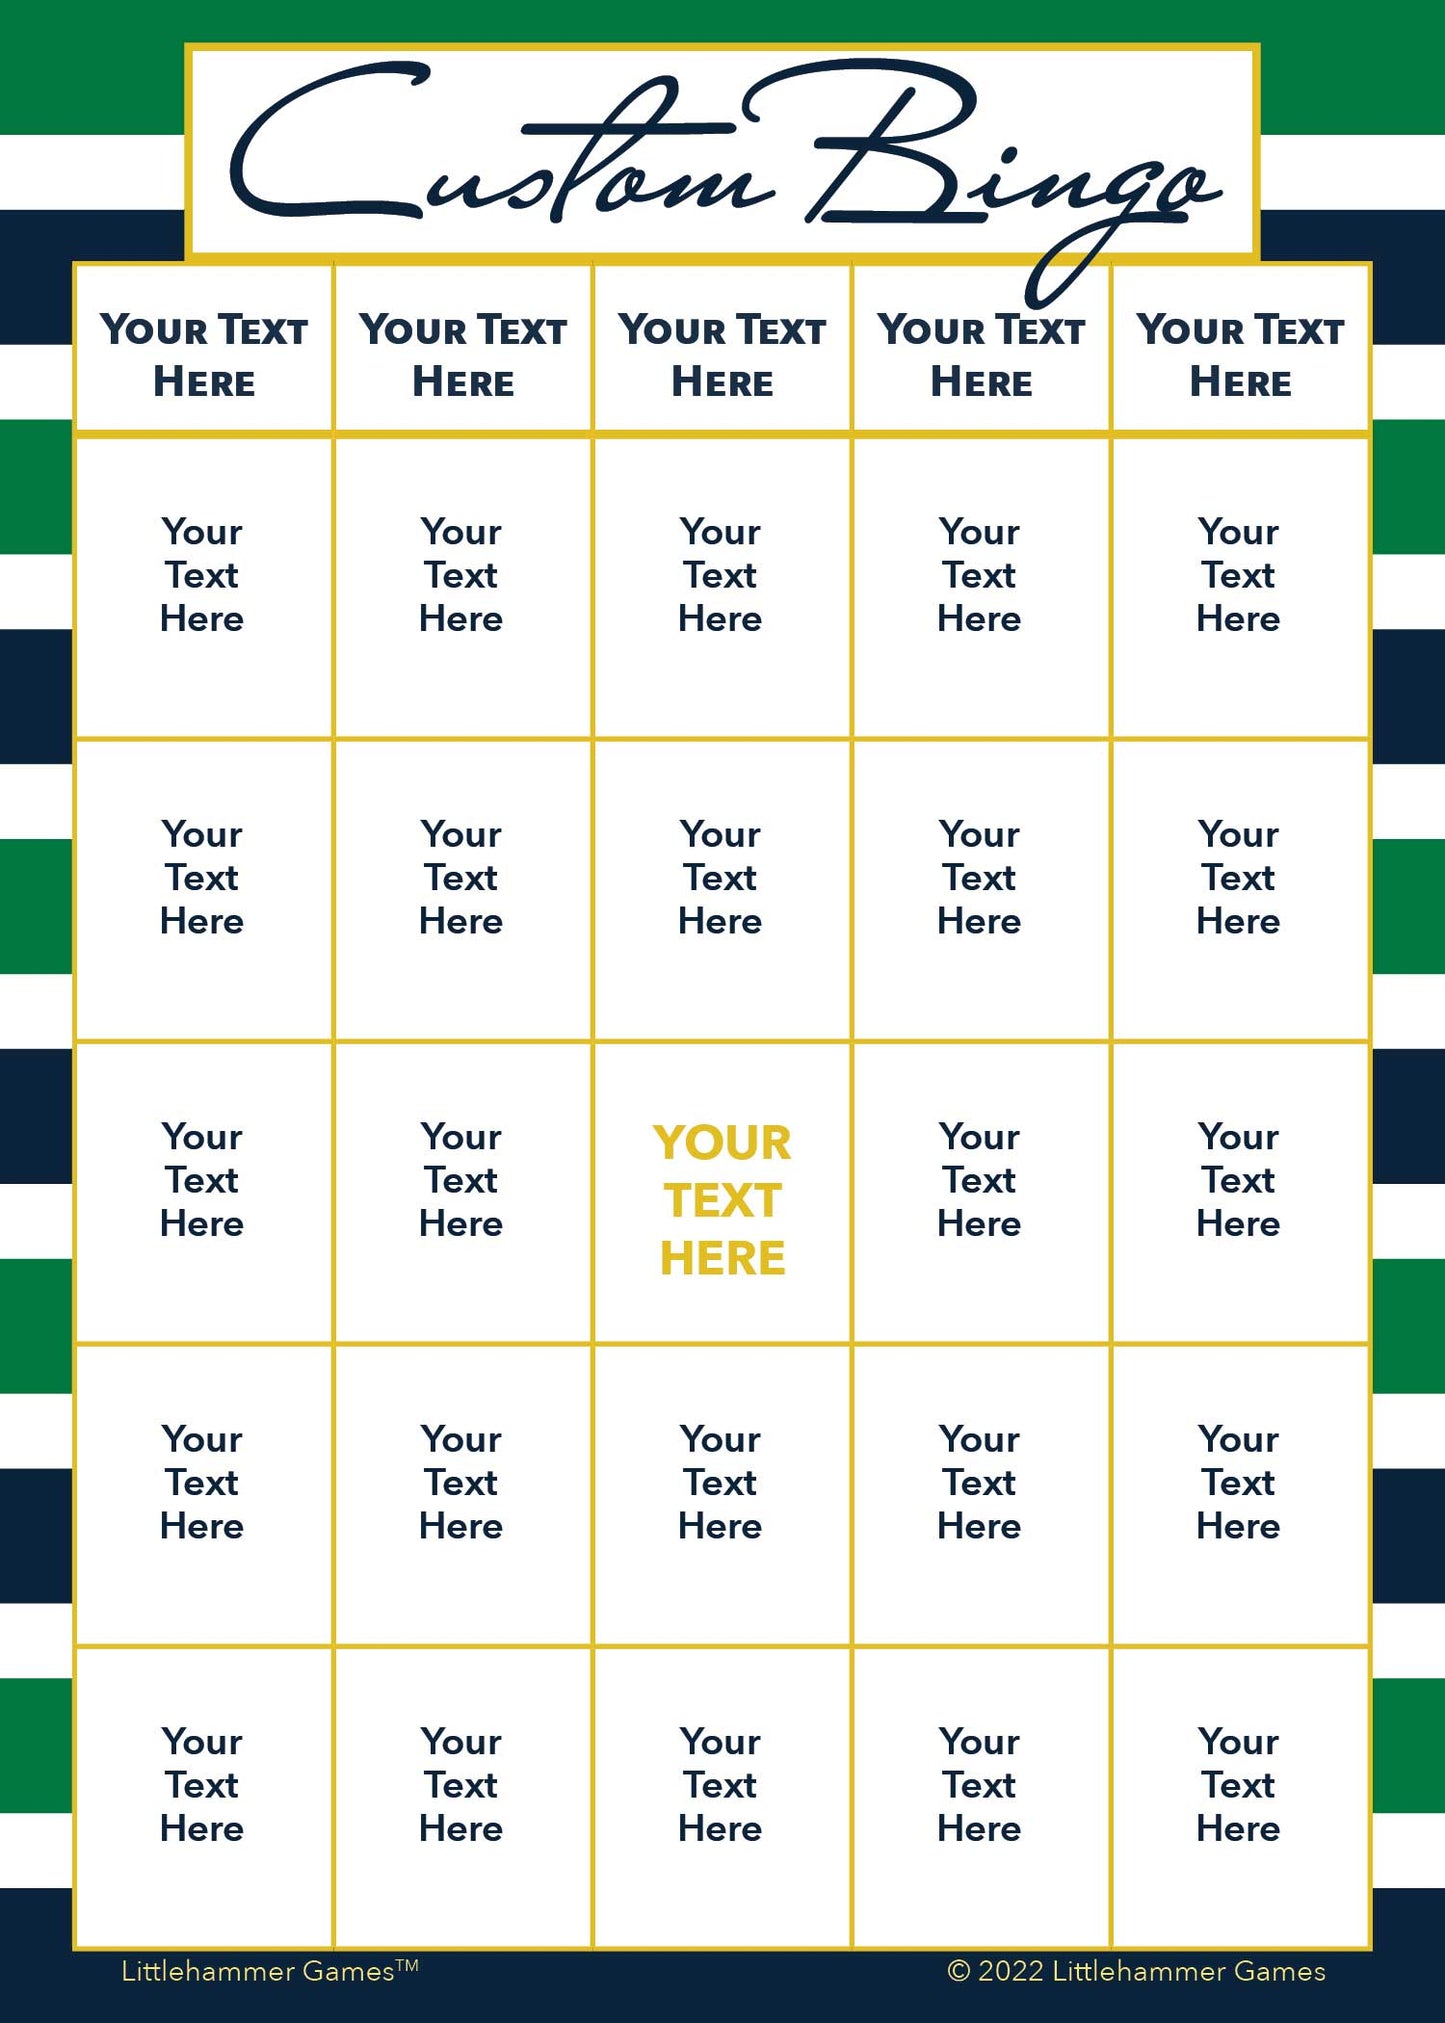 Custom Bingo game card on a green and navy-striped background